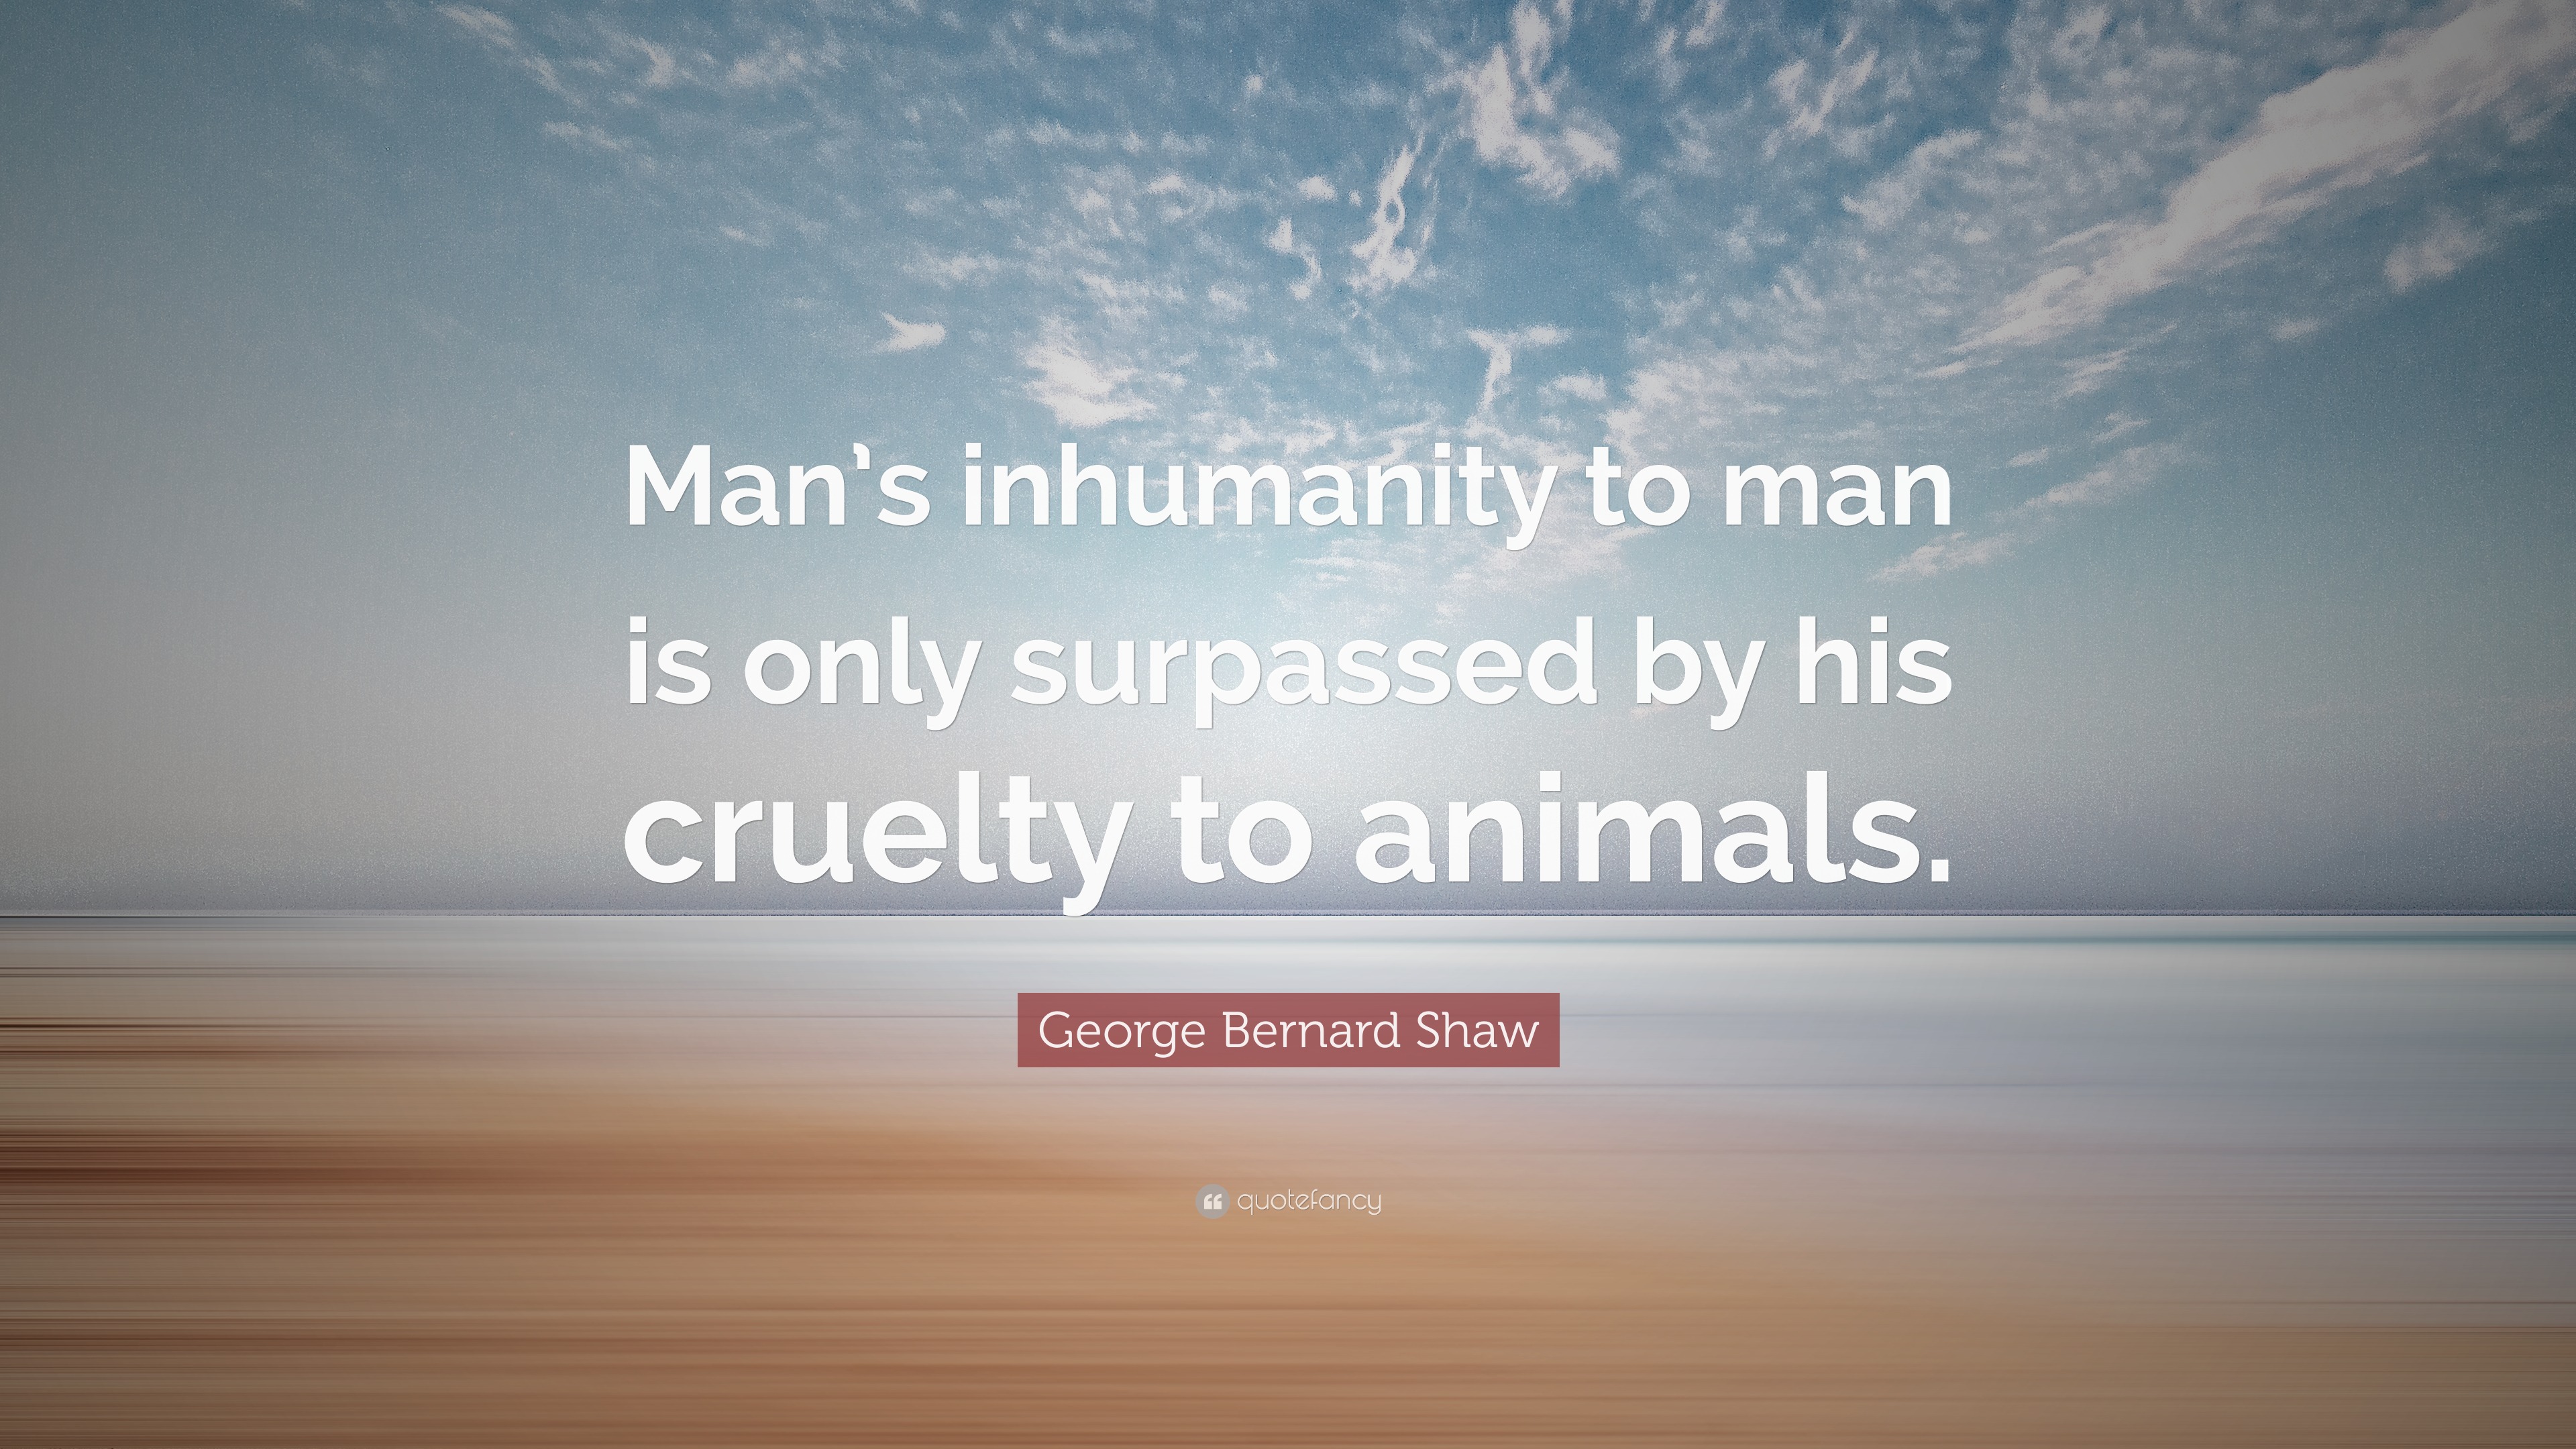 Bernard Shaw Quote “Man’s inhumanity to man is only surpassed